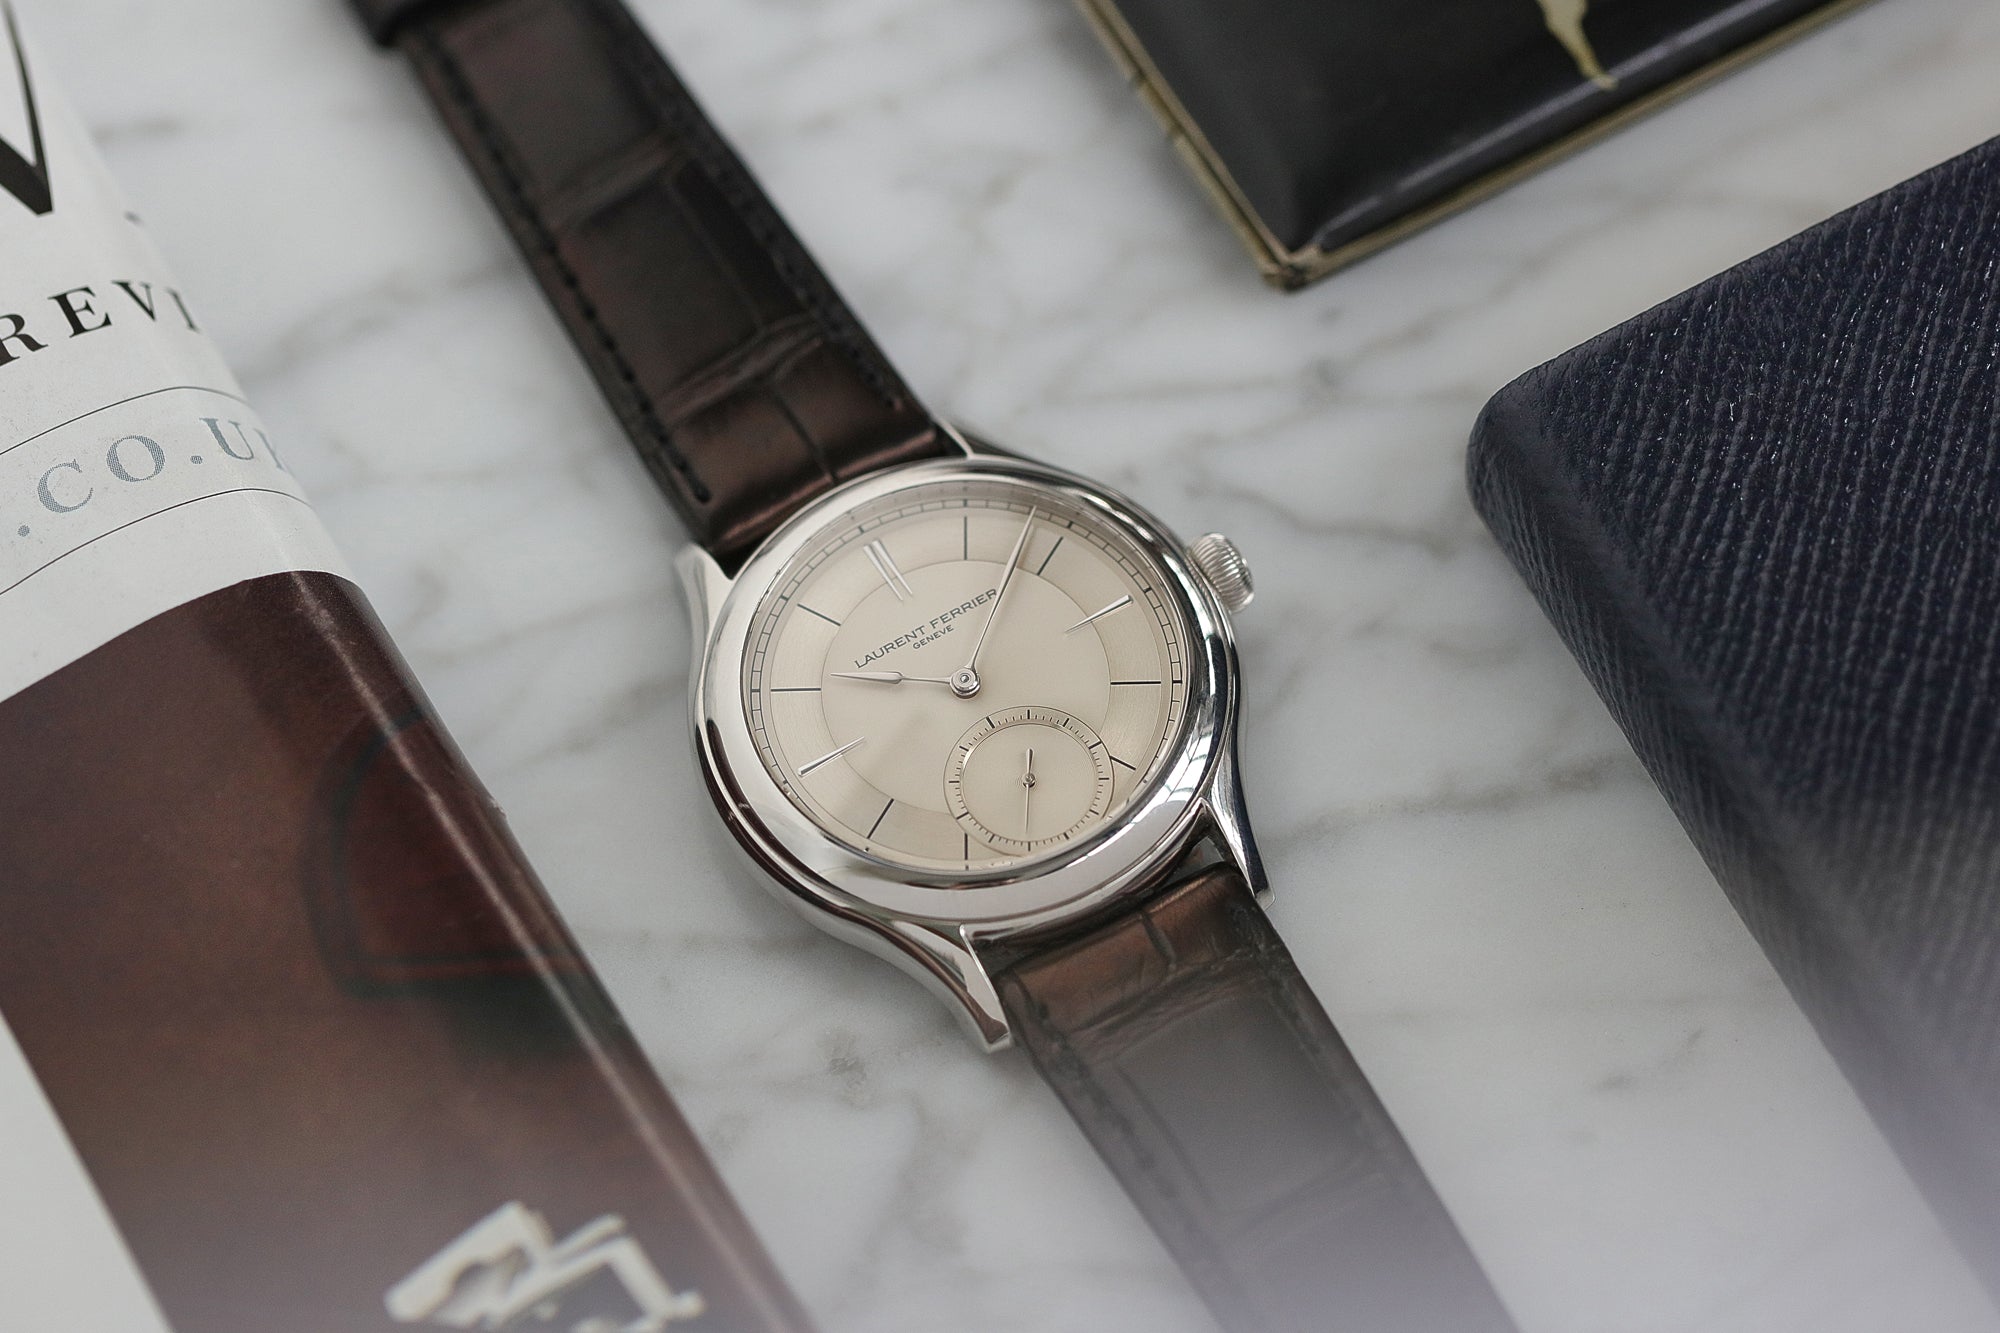 Laurent Ferrier Galet Micro-rotor 40 mm platinum time-only dress watch from independent watchmaker for sale online at A Collected Man London UK specialist of rare watches